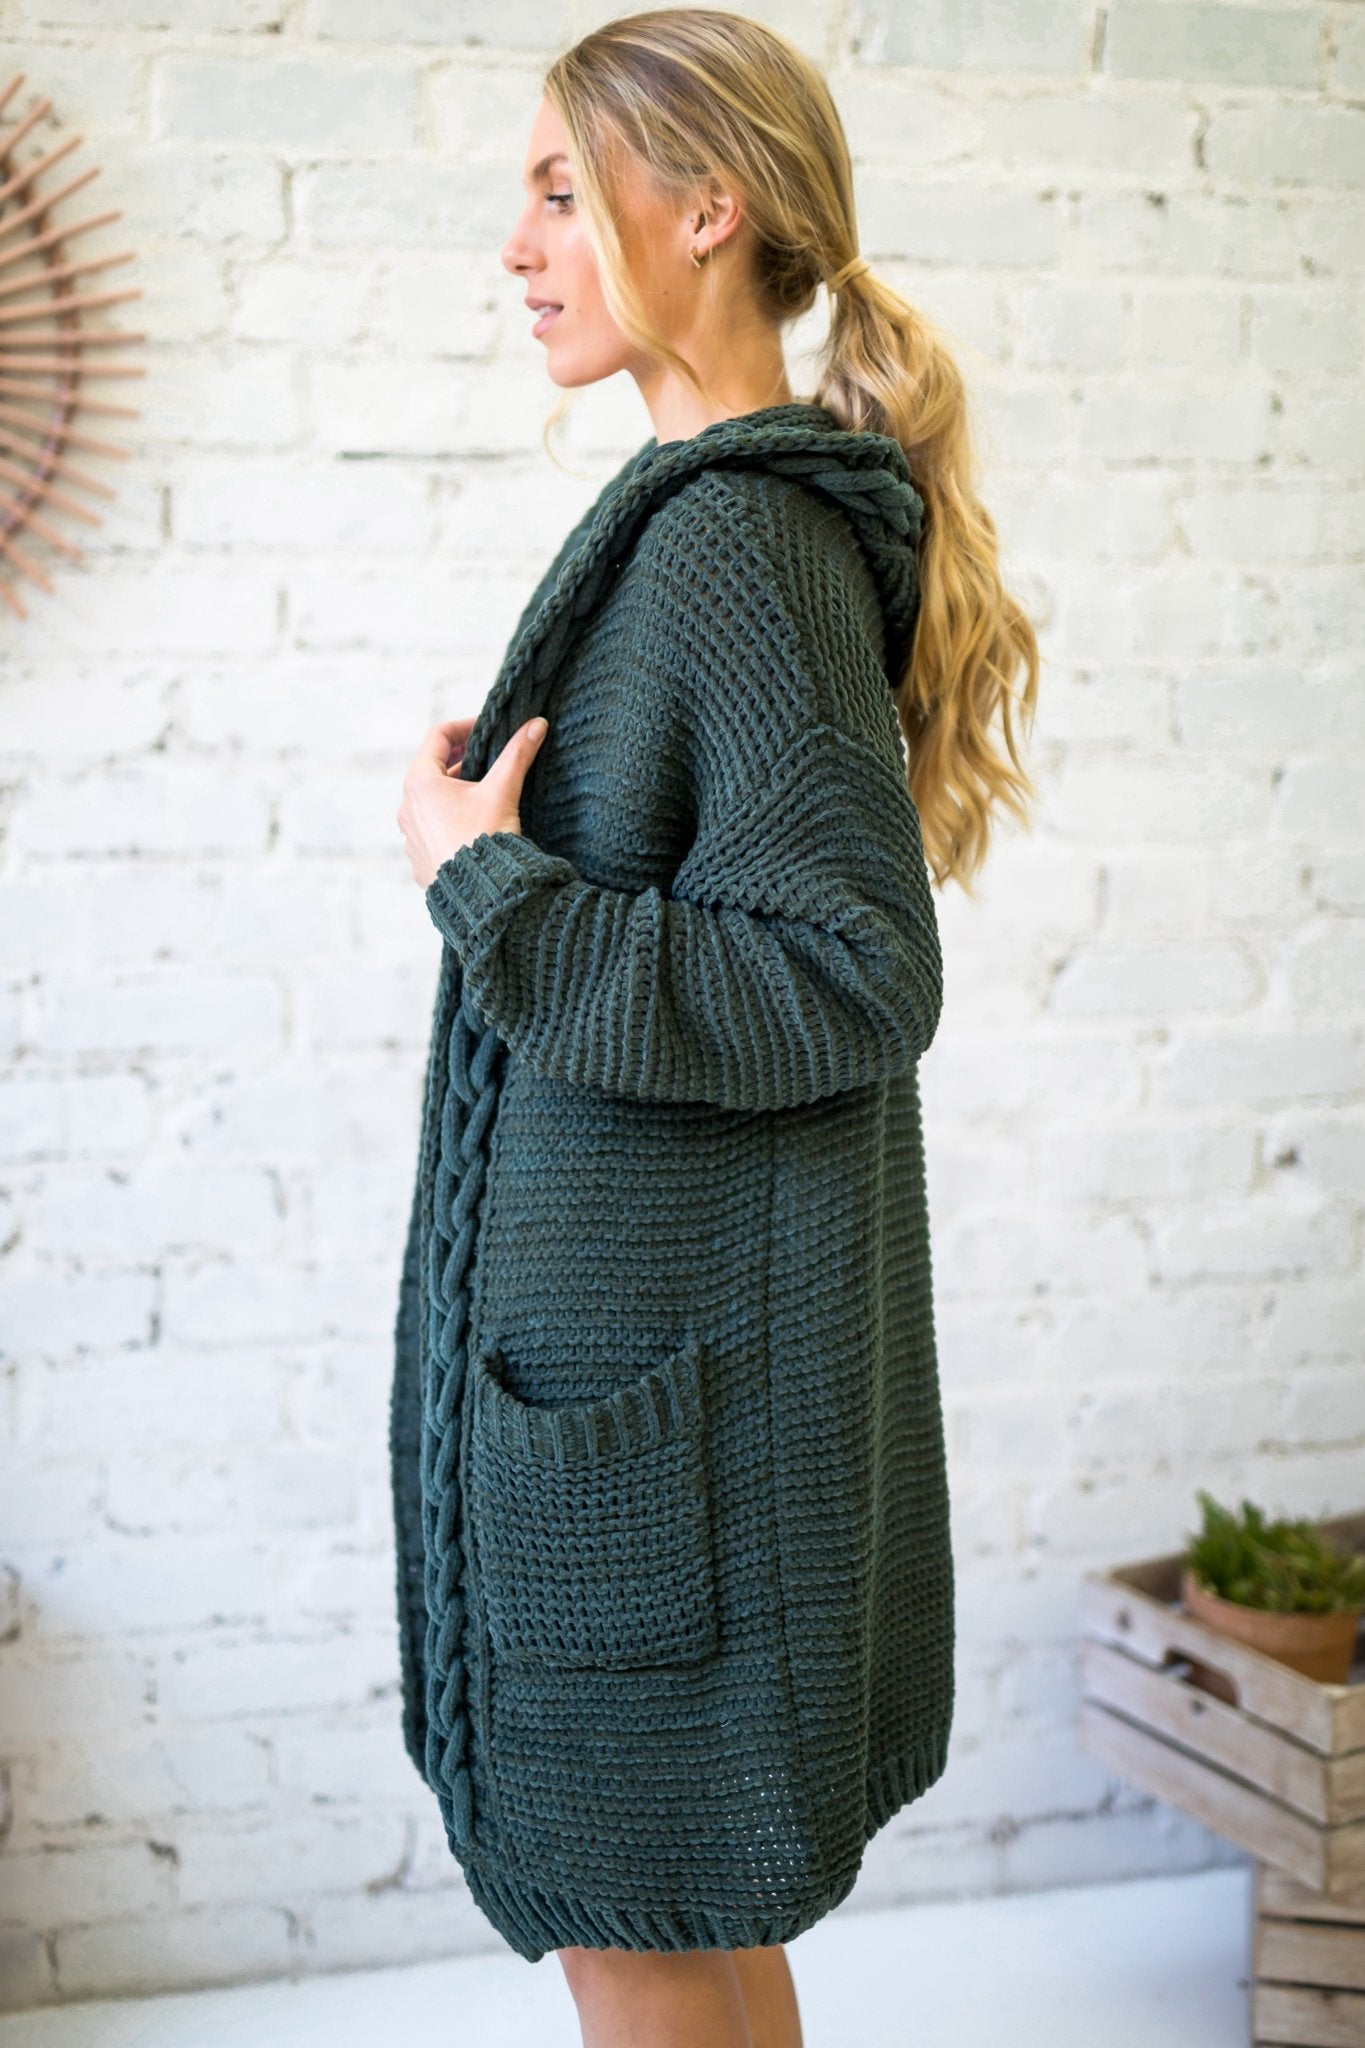 Toolara Cardigan - Thick Cable Knit Hooded Cardigan with Pocket in Military Green